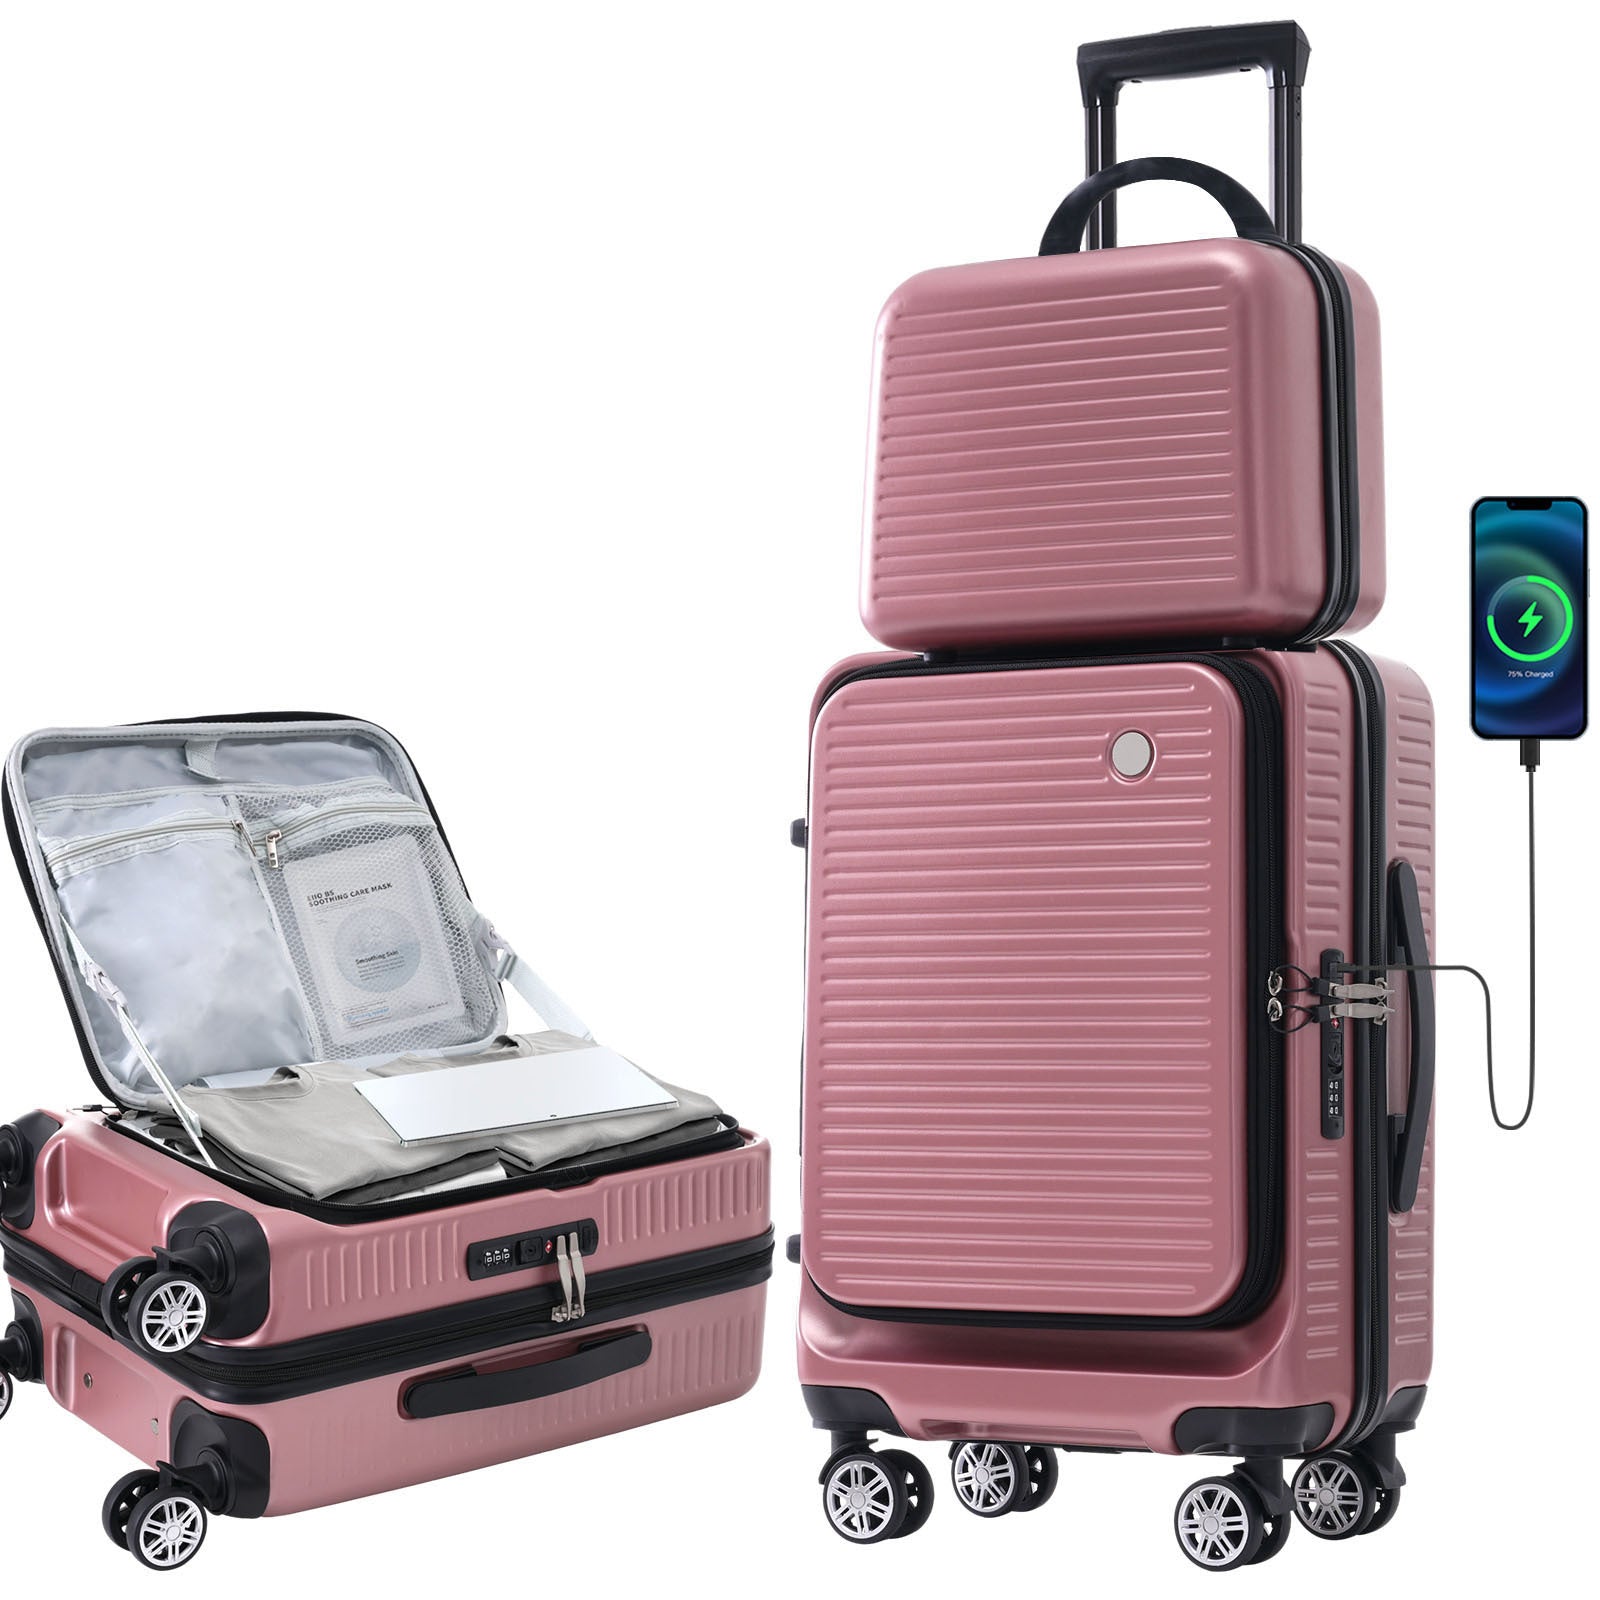 Carry on Luggage 20 Inch Front Open Luggage rose gold-abs